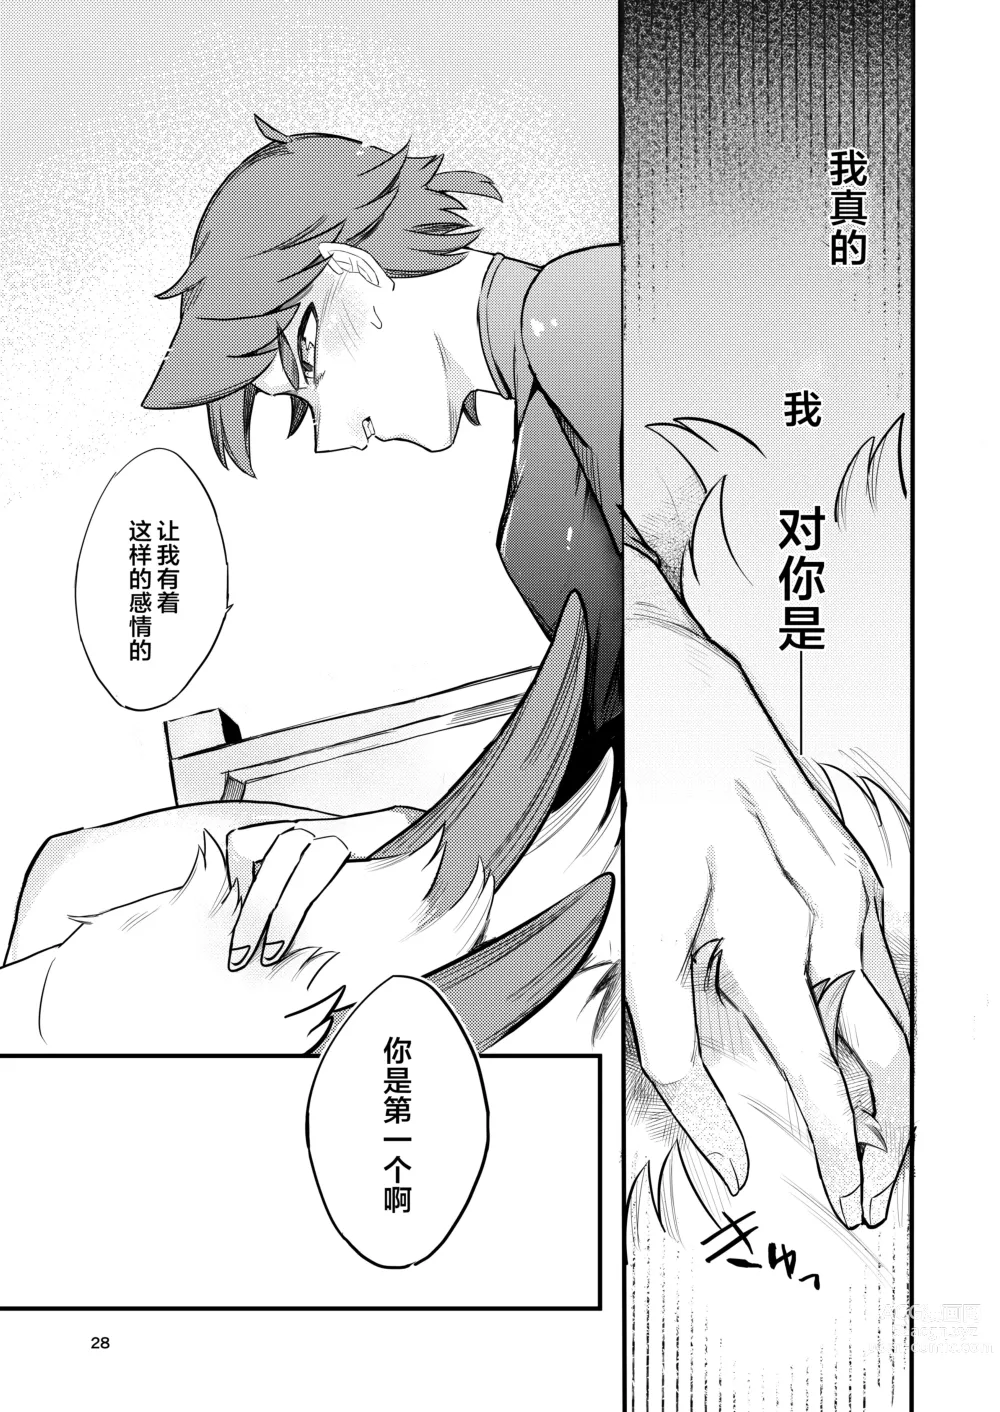 Page 26 of doujinshi 第一次的发情期